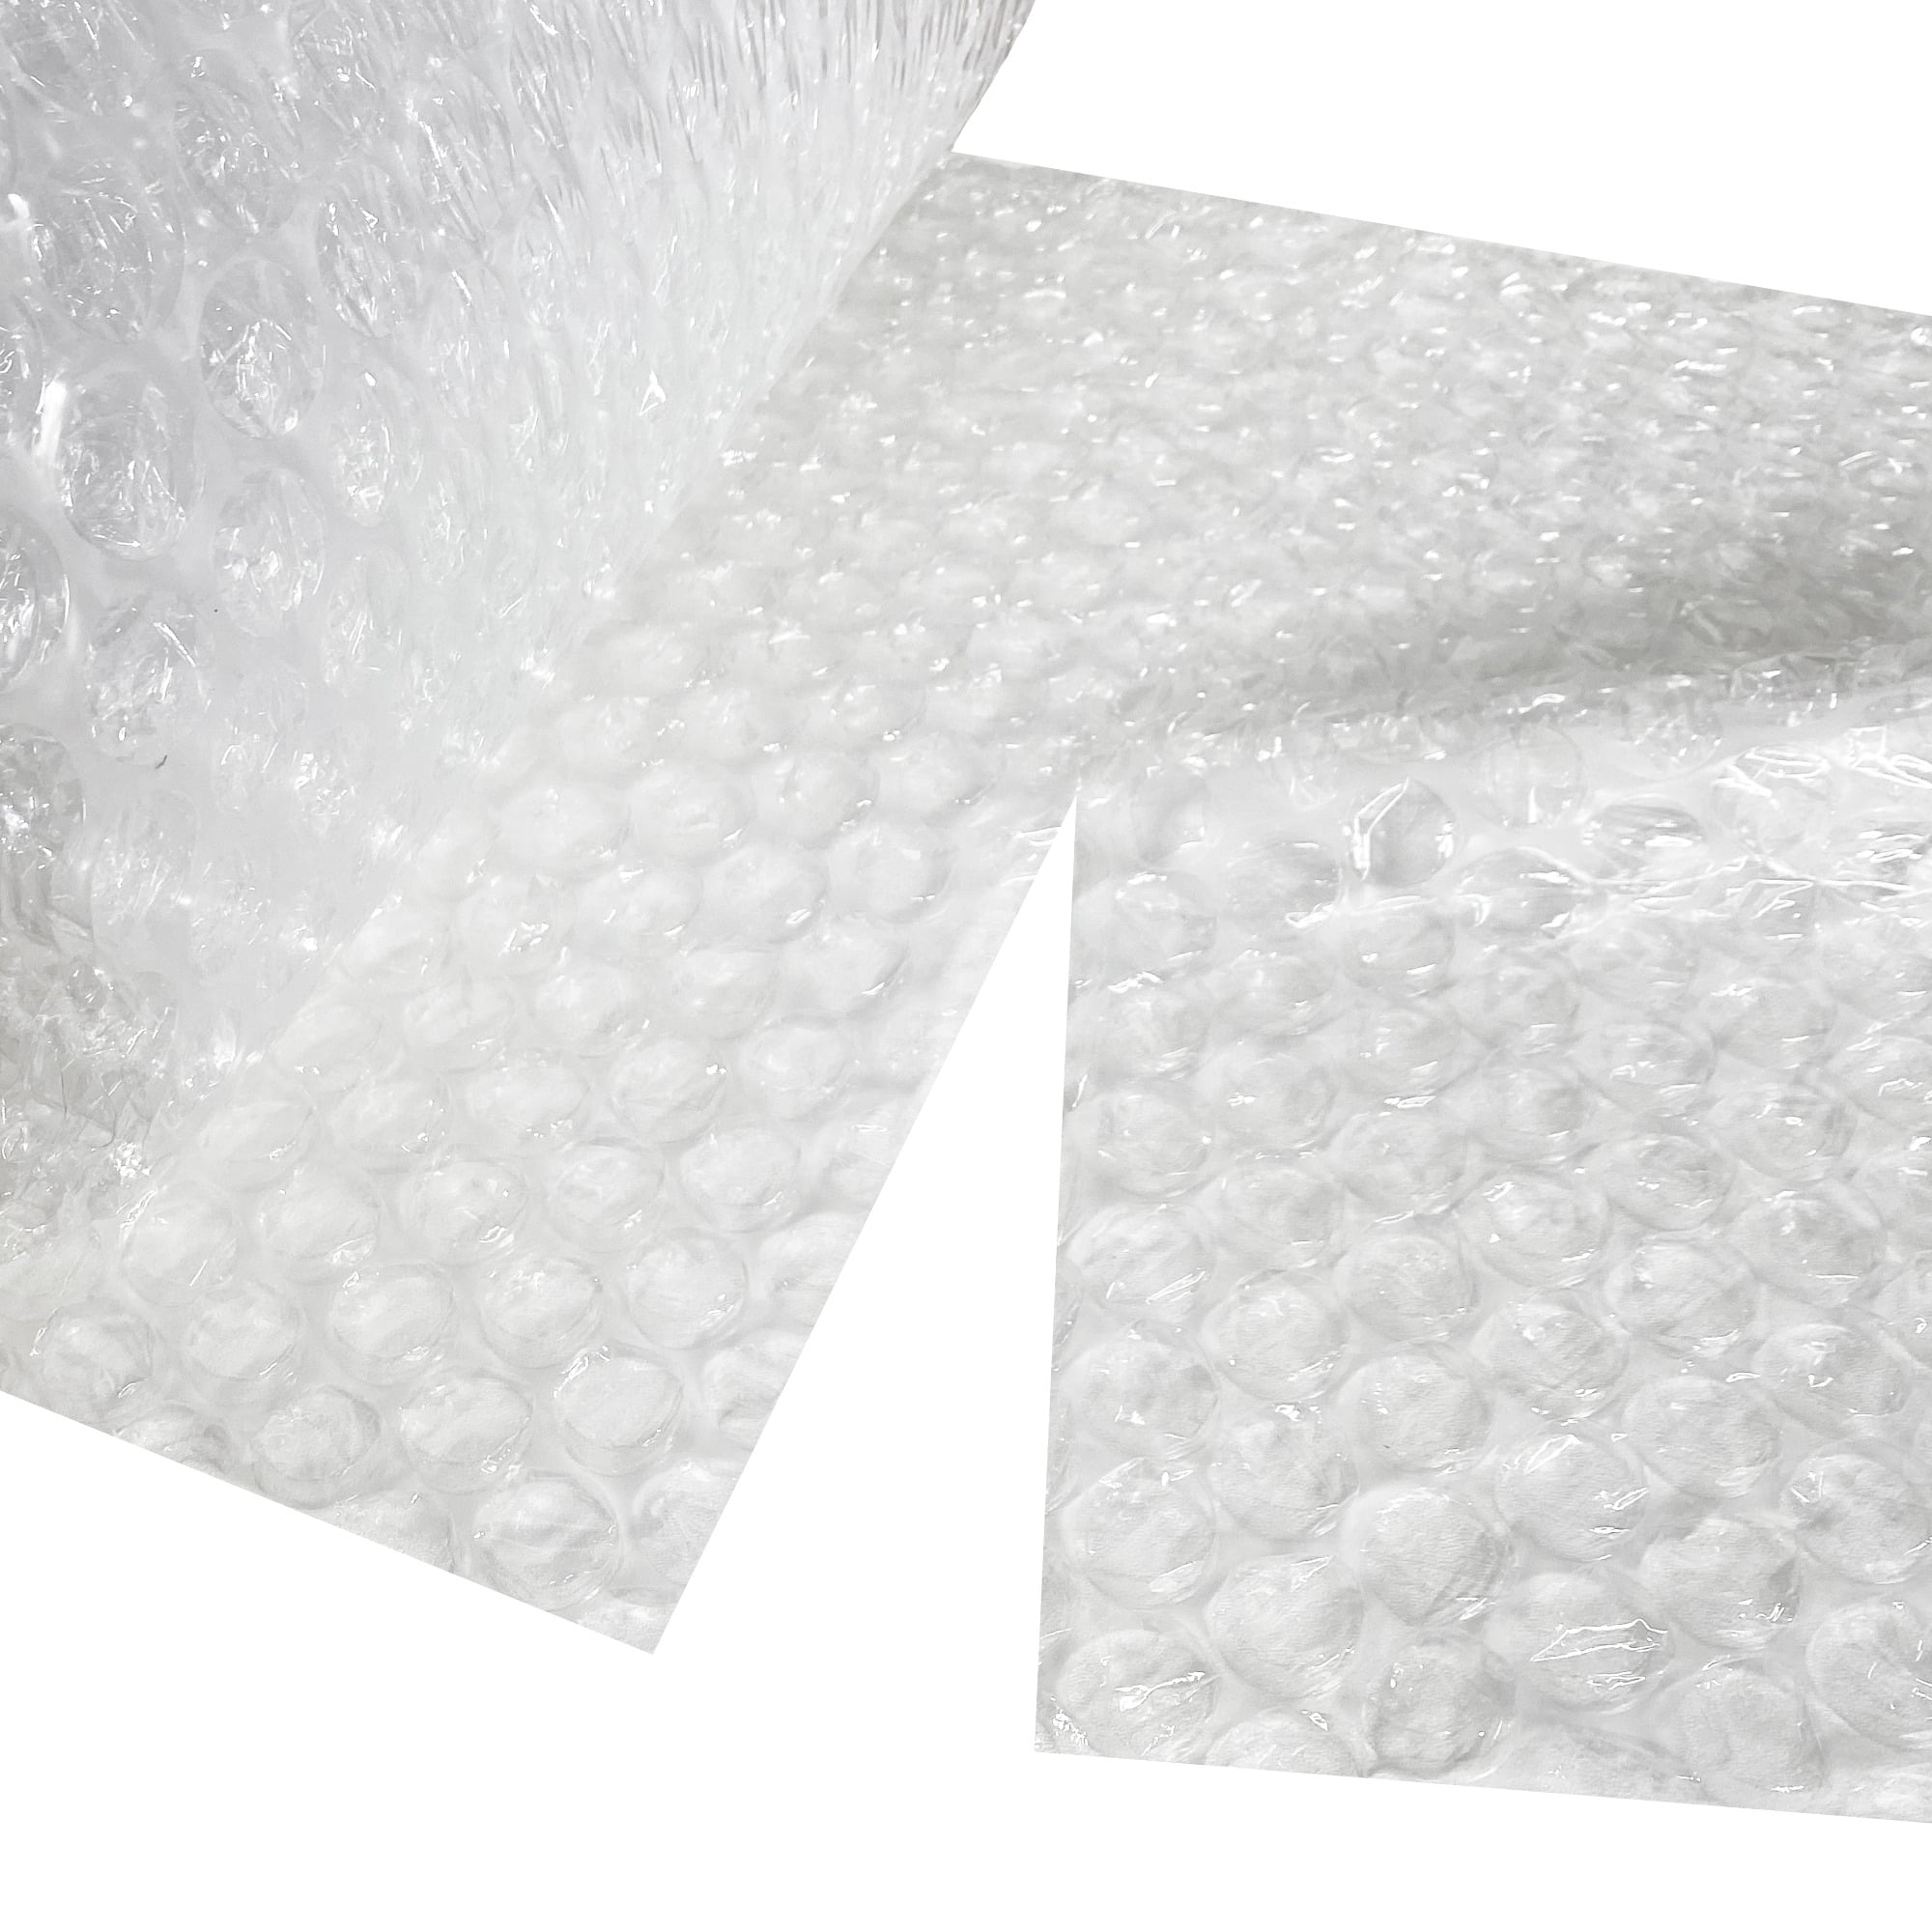 TOTALPACK® Air Cushioning Bubble Wrap Rolls - Cushioning & Foam - Packaging  materials - TOTALPACK Products